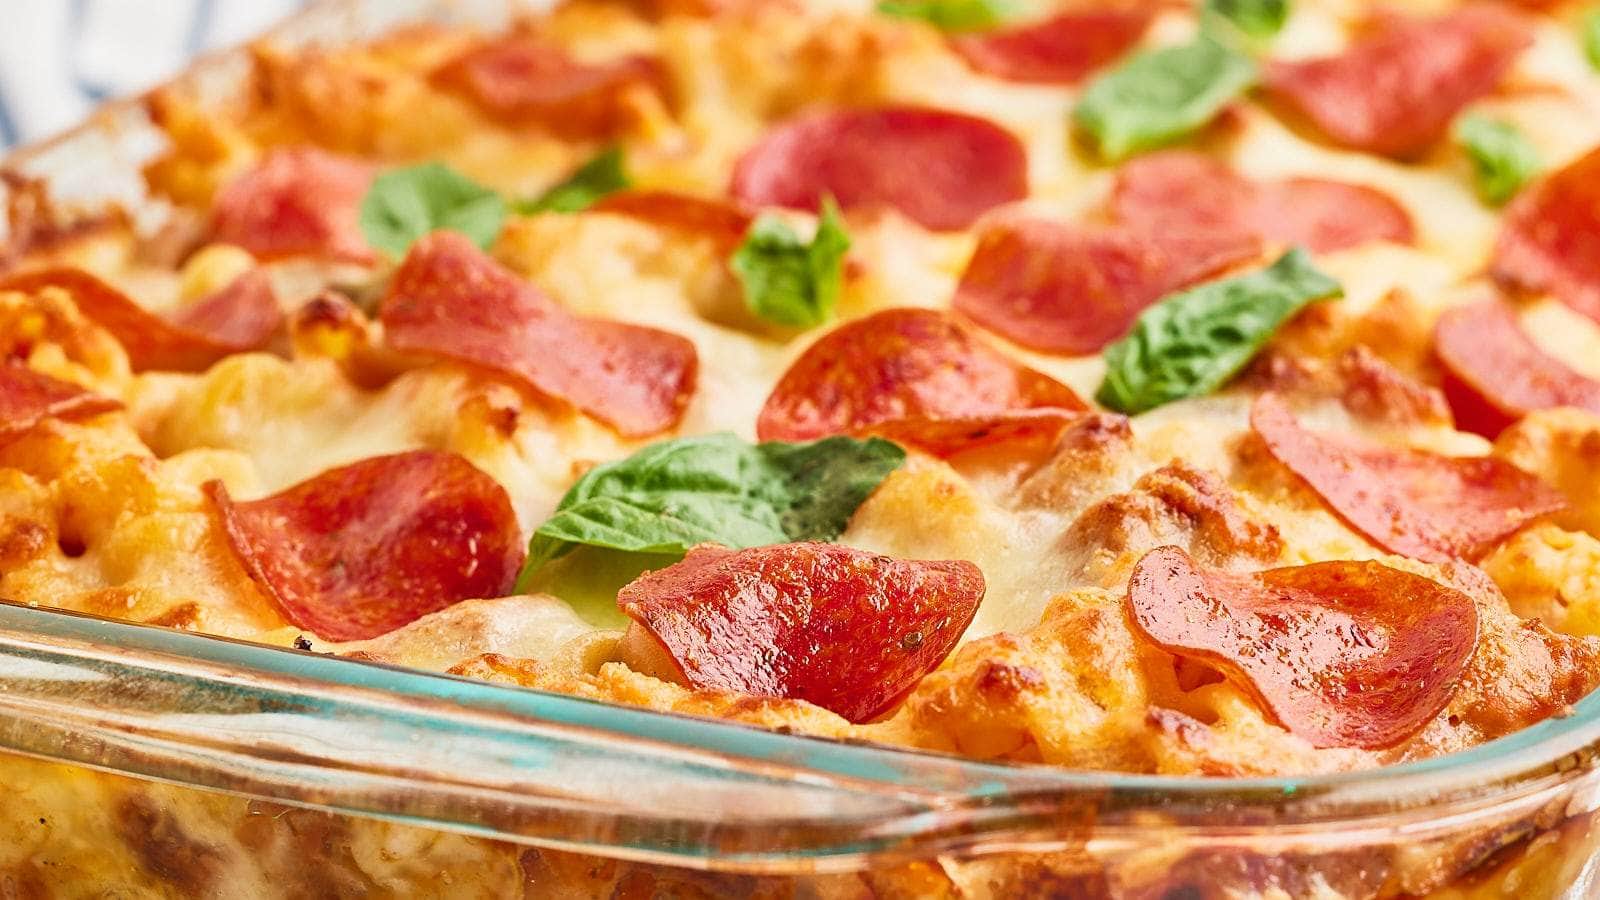 Pizza Casserole recipe by Cheerful Cook.